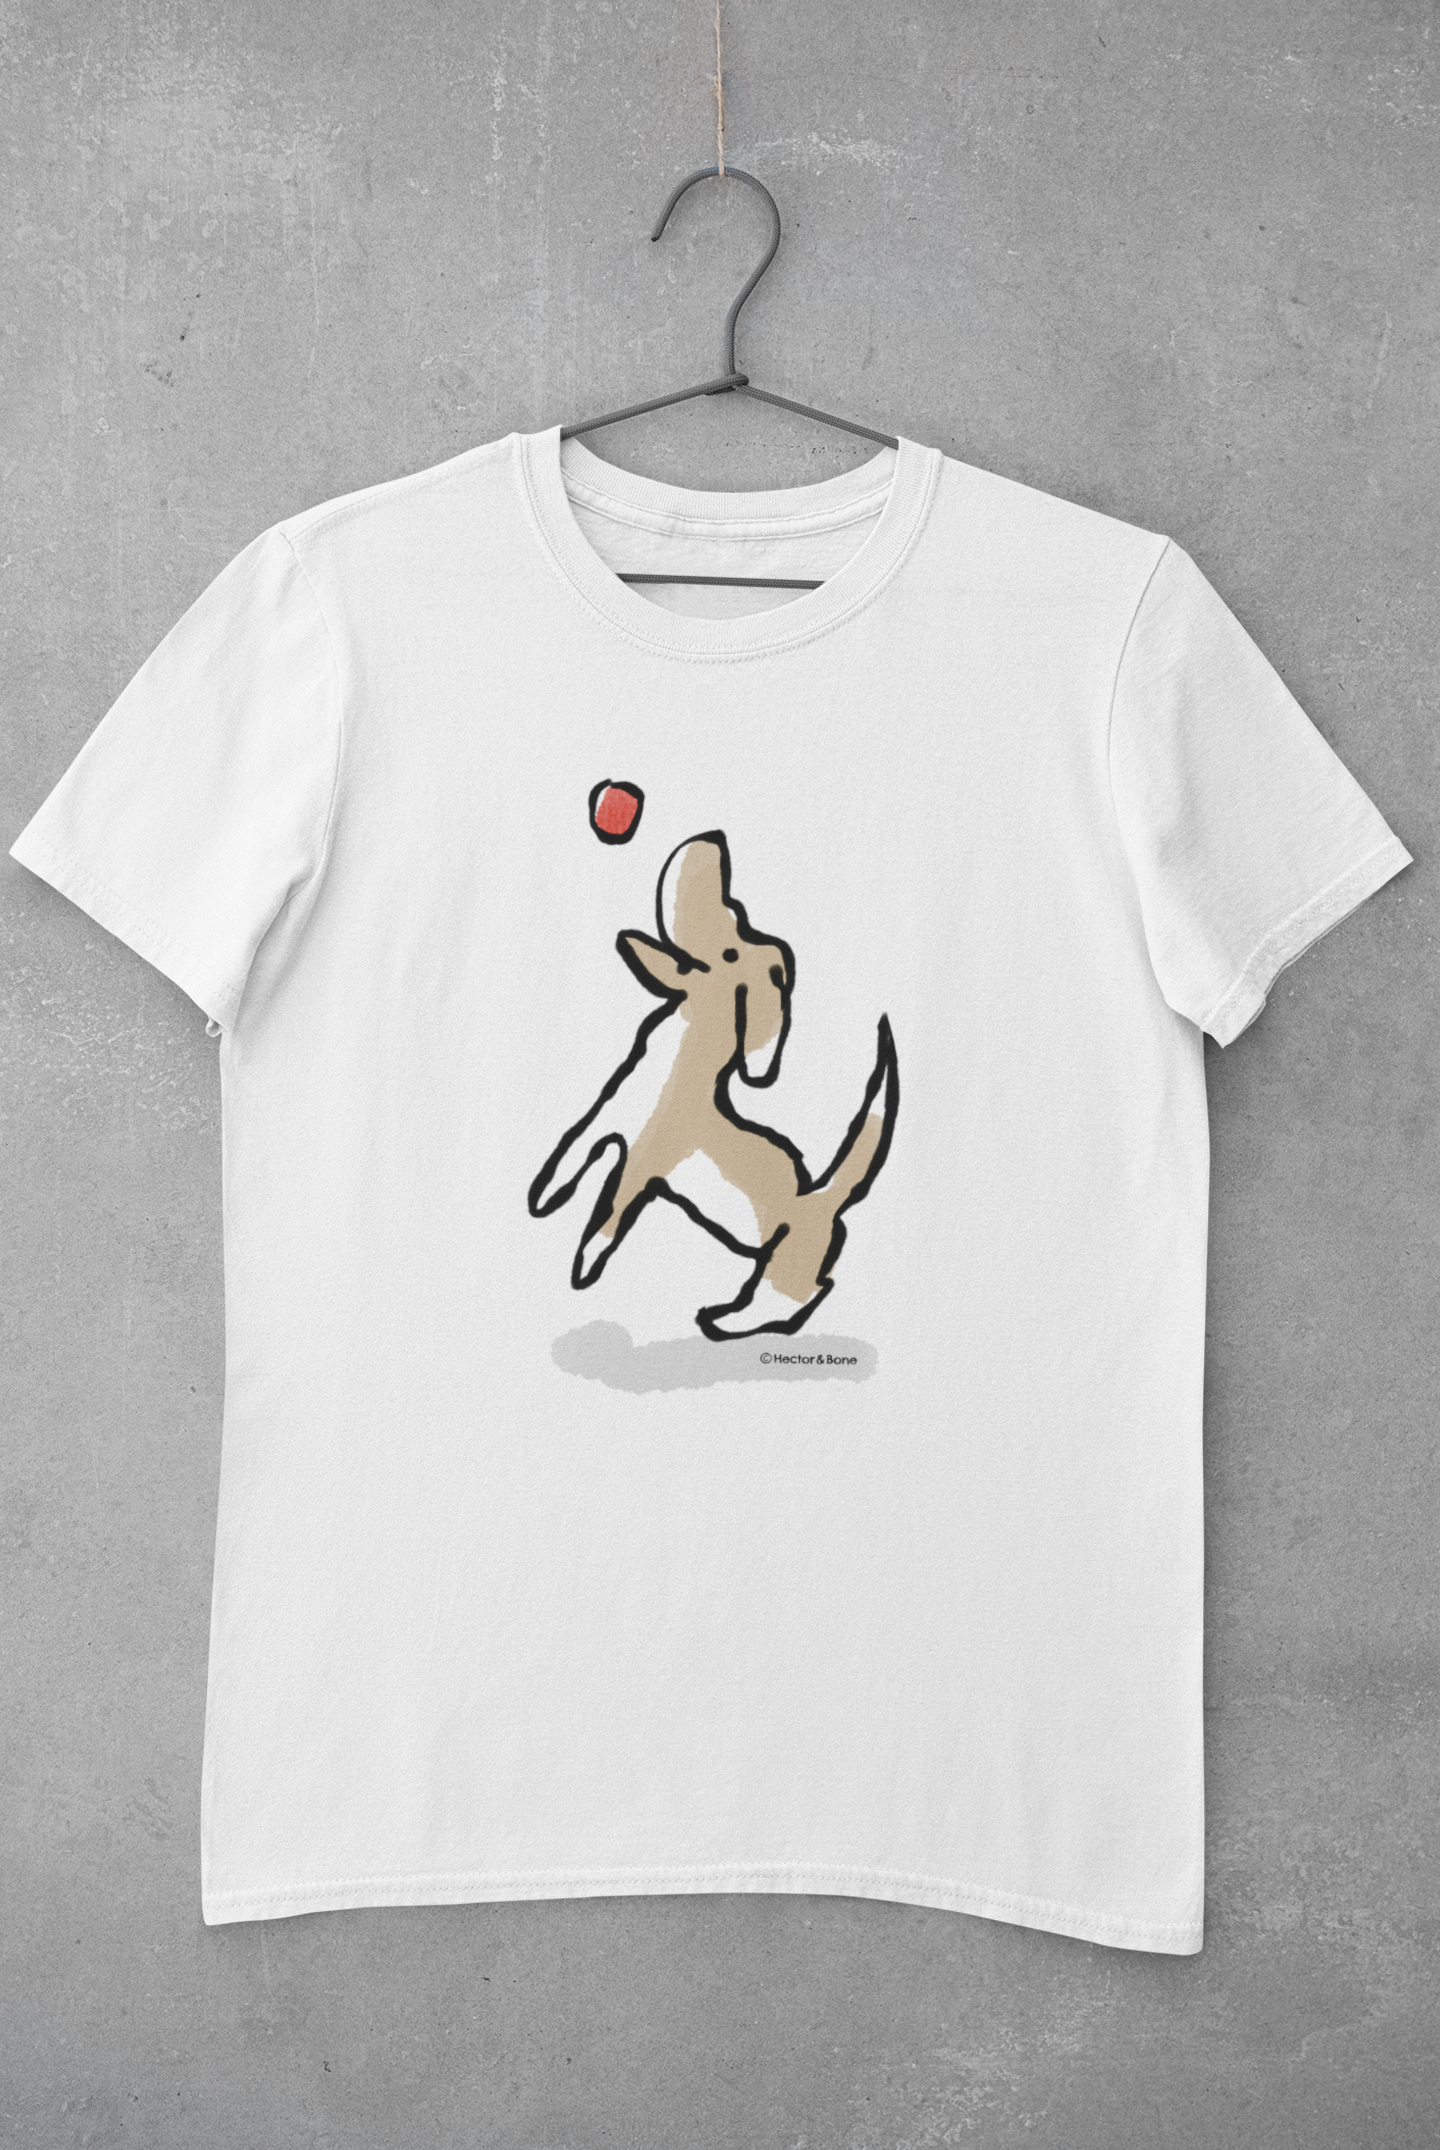 Dog T-shirt - Illustrated Jumping Dog T-shirts on white vegan cotton by Hector and Bone